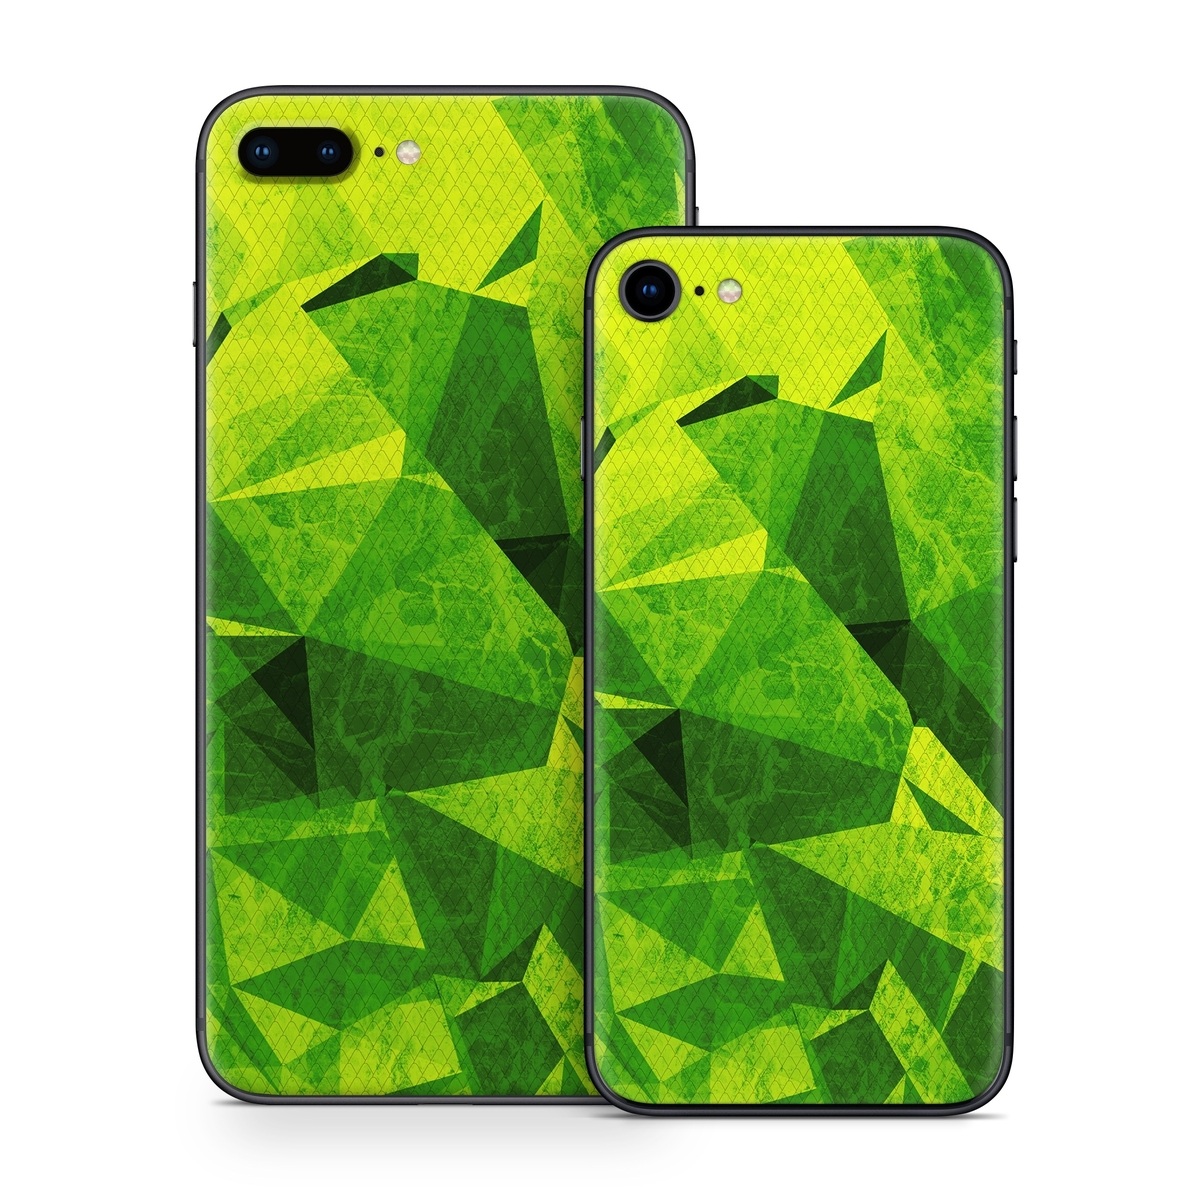 iPhone 8 Series Skin design of Green, Pattern, Leaf, Design, Illustration, with green colors